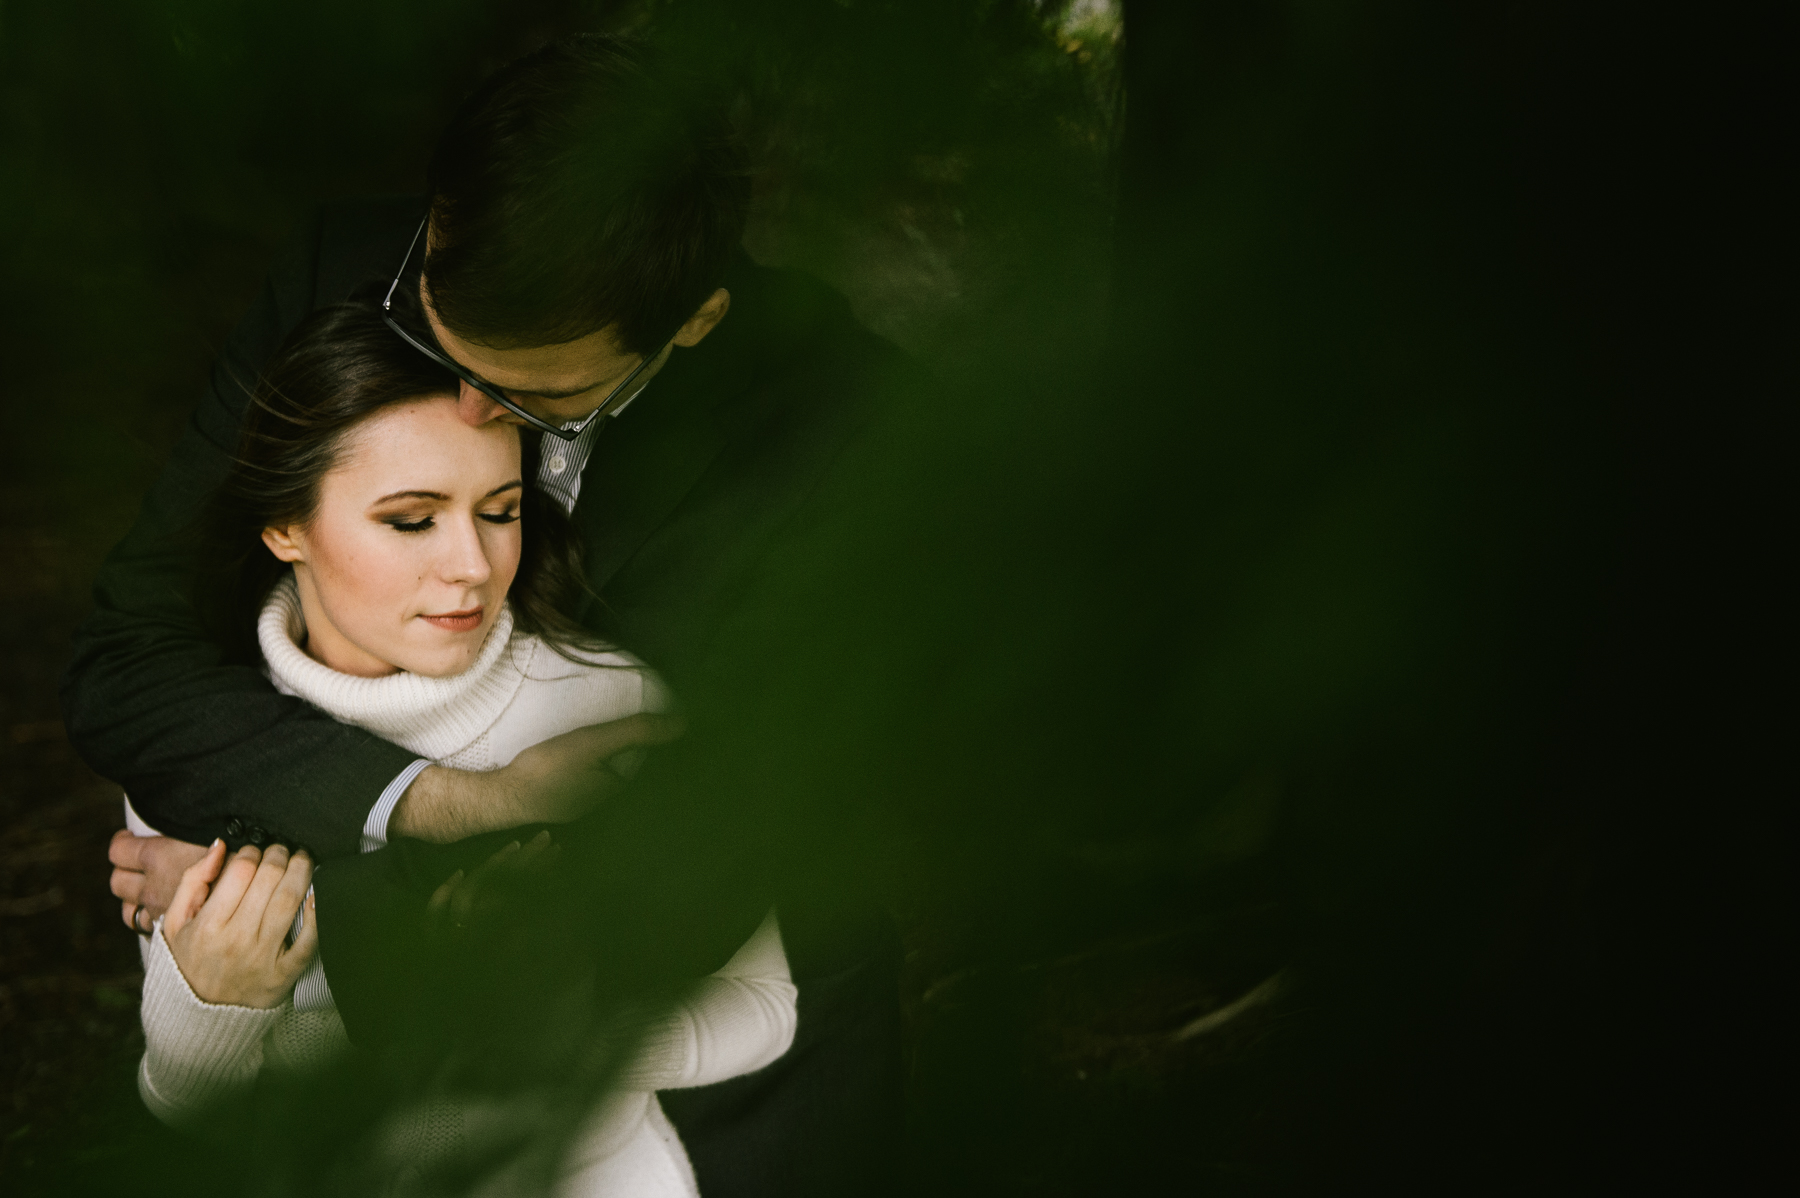 seattle-wedding-photographer-engagement-sessions-best-35